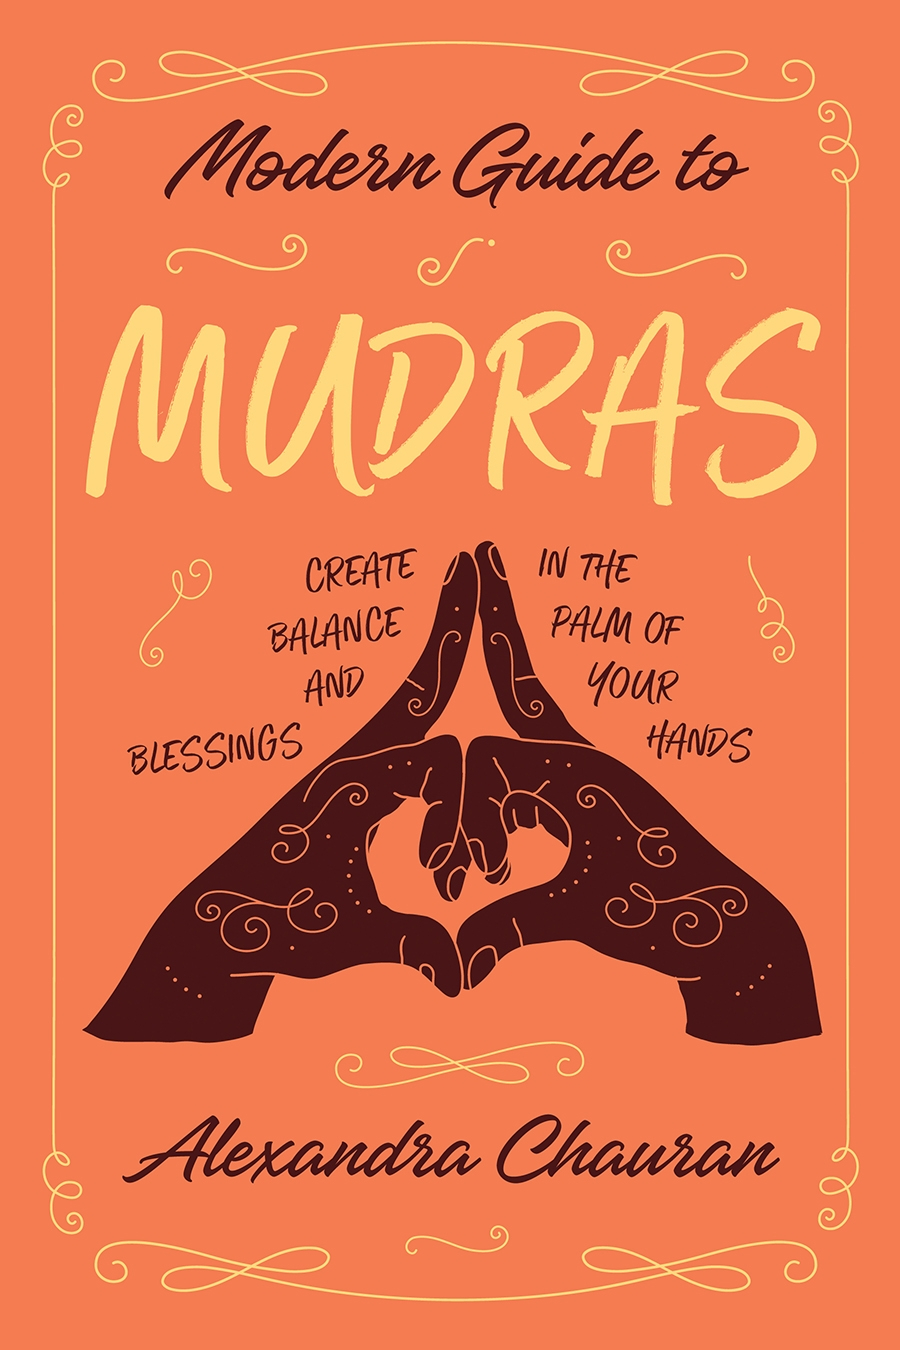 Review of Modern Guide to Mudras (9780738767666) — Foreword Reviews